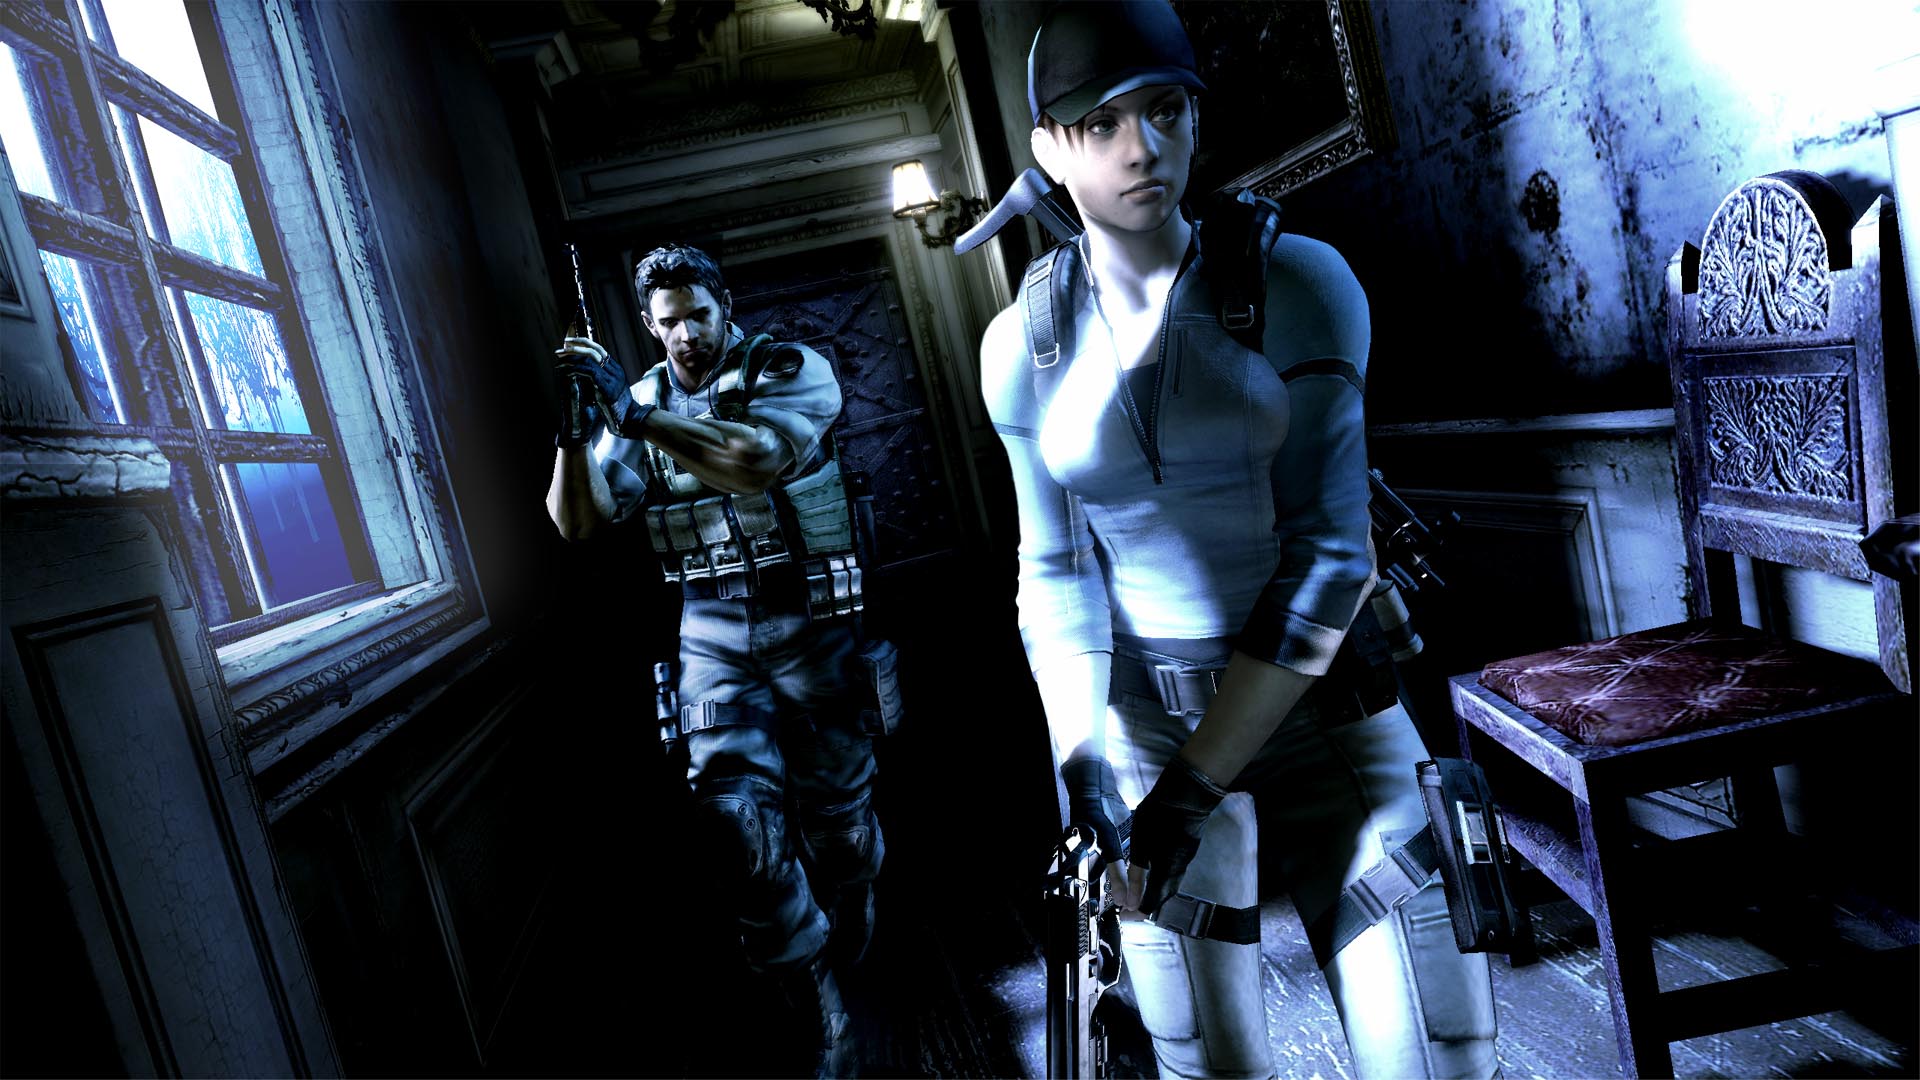 Buy Resident Evil 5 from the Humble Store and save 75%